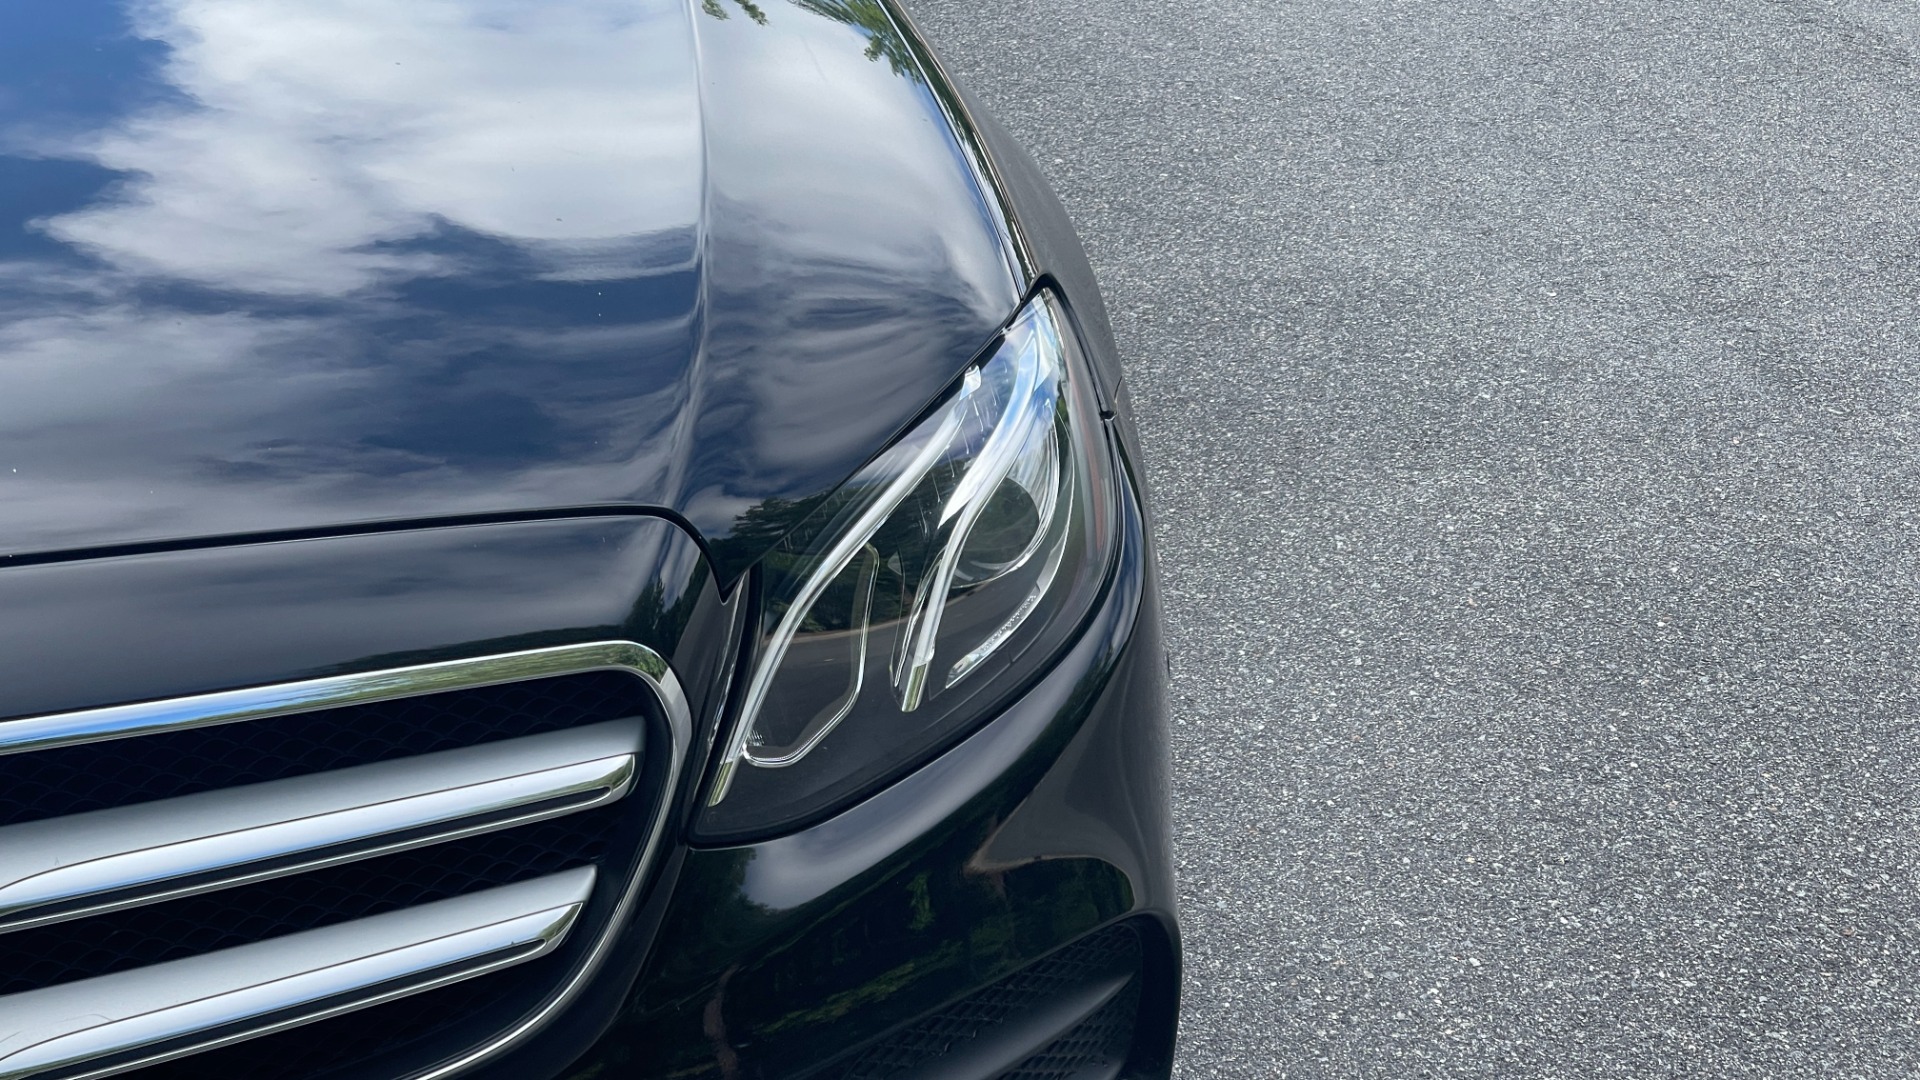 Used 2020 Mercedes-Benz E-Class E 350 / 4MATIC / AMG LINE / BURMESTER SOUND / PANORAMIC ROOF for sale $52,999 at Formula Imports in Charlotte NC 28227 26